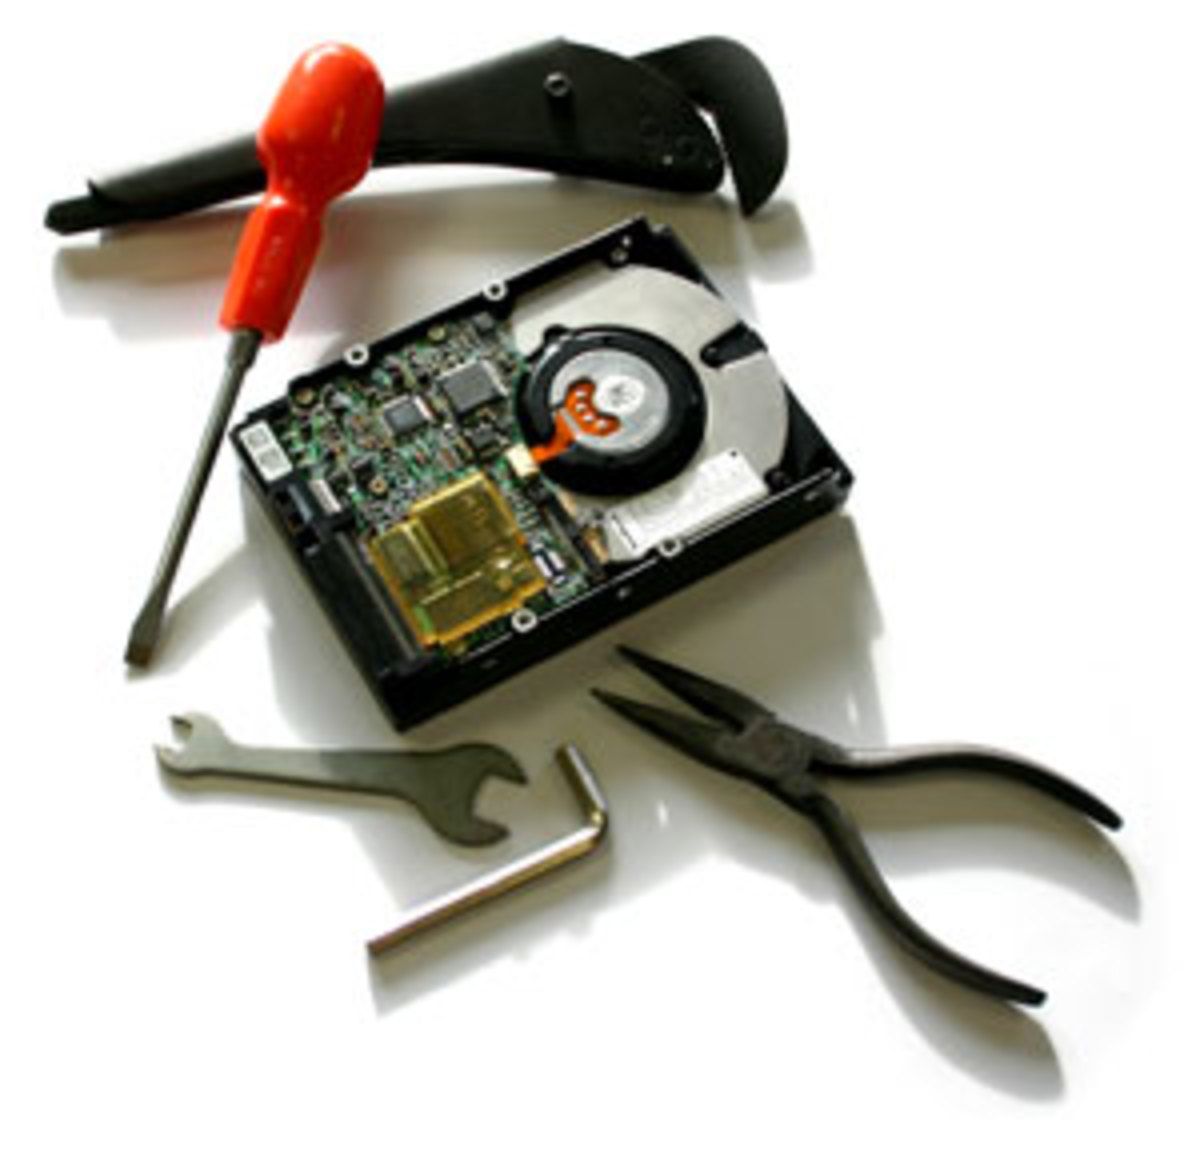 How to Optimize and Repair a Hard Drive